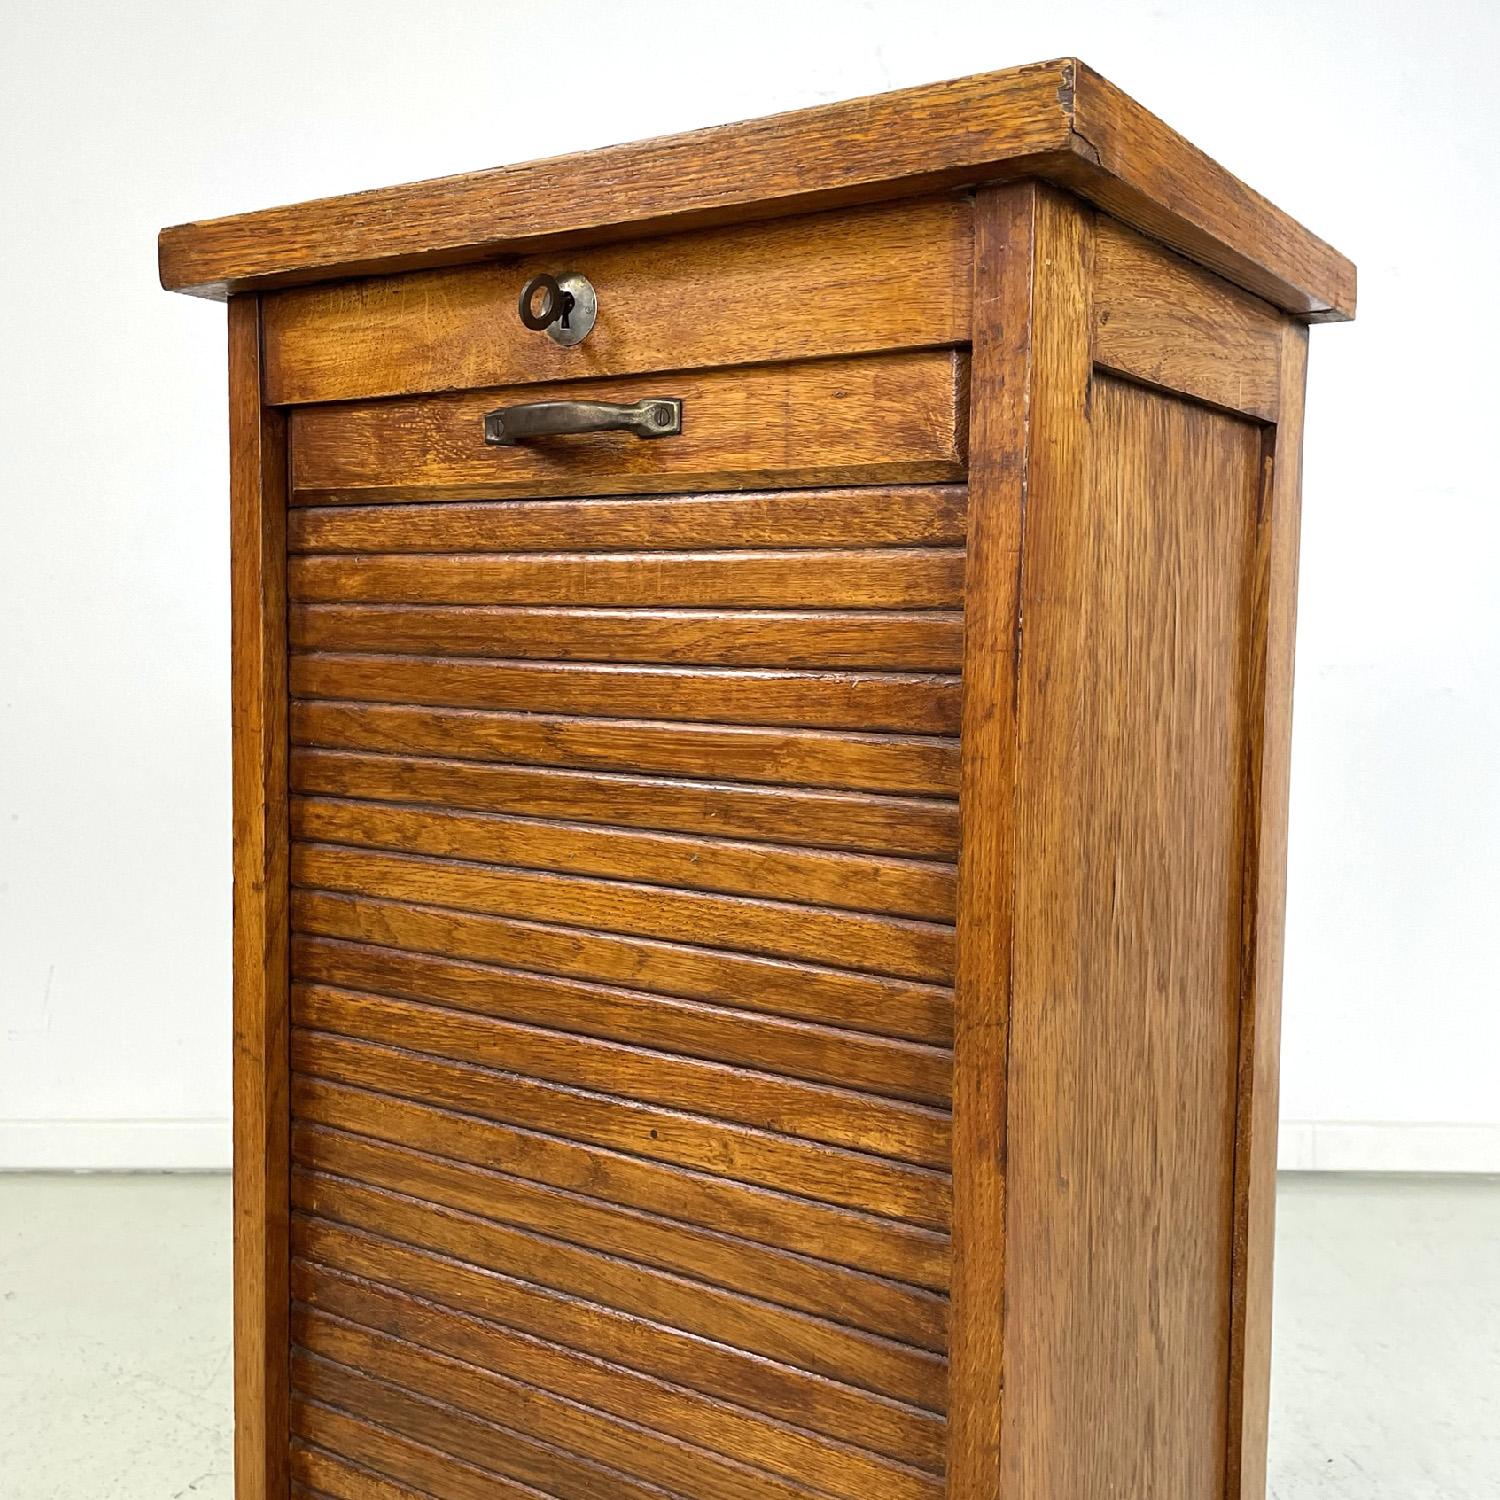 Italian wooden archive cabinet with a shutter opening and metal handle, 1940s For Sale 2